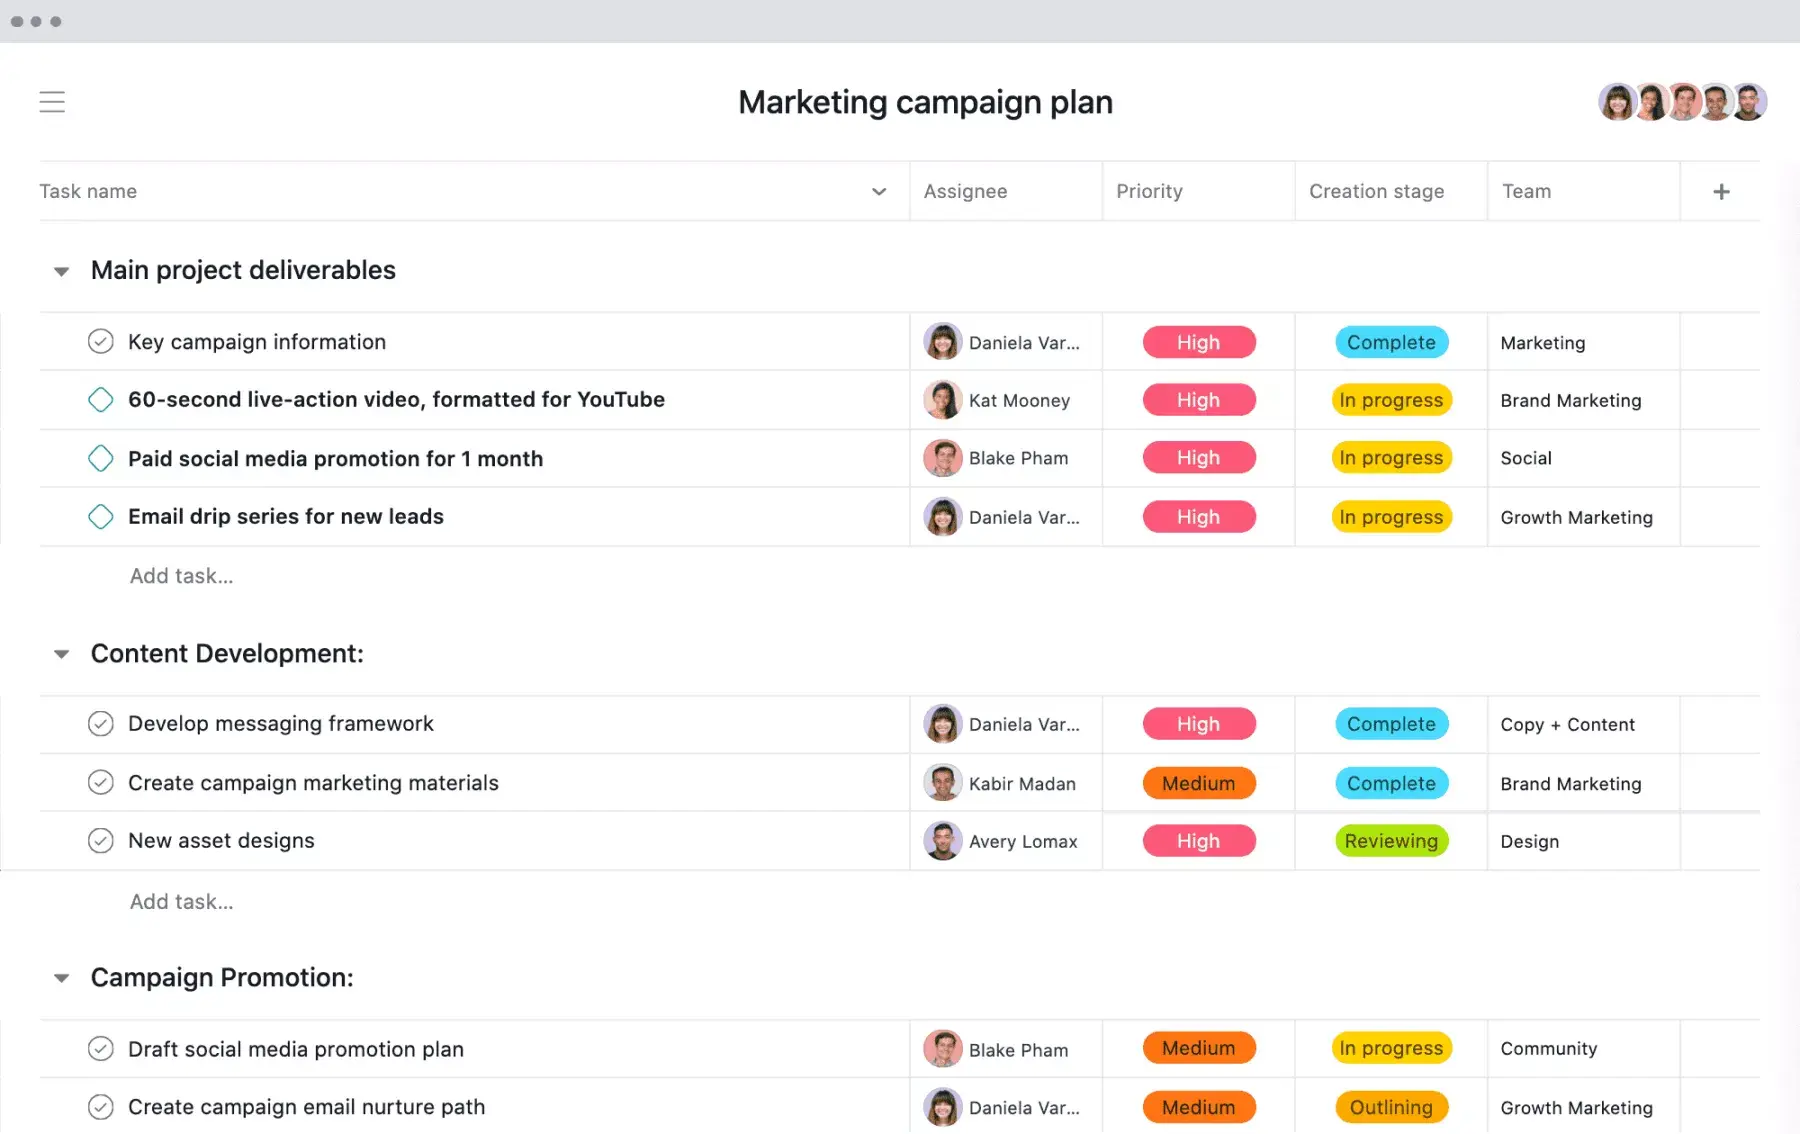 [Old Product UI] Marketing campaign plan - example (Lists)